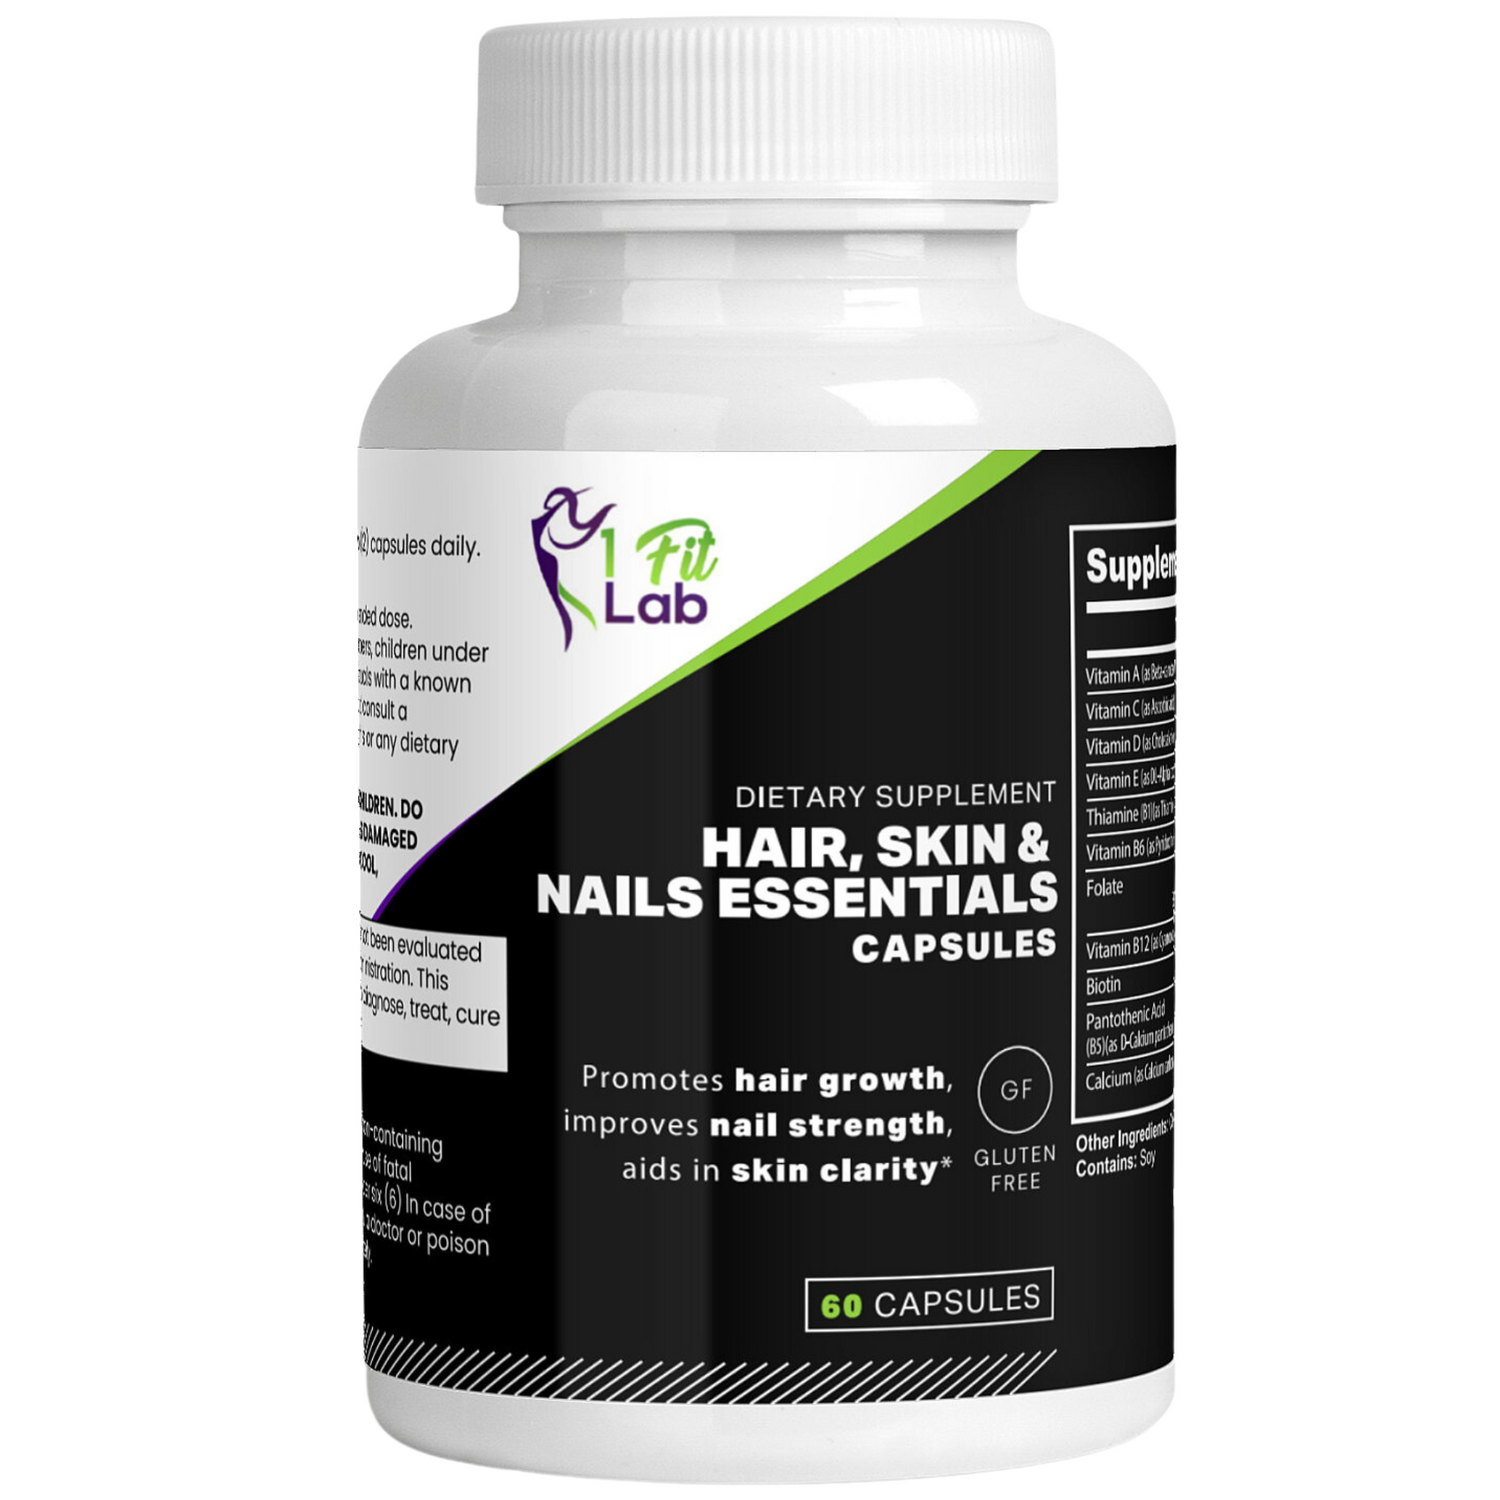 Bottle of Hair, Skin & Nail Essentials supplement with Biotin, Vitamin B6, and Folic Acid for beauty enhancement